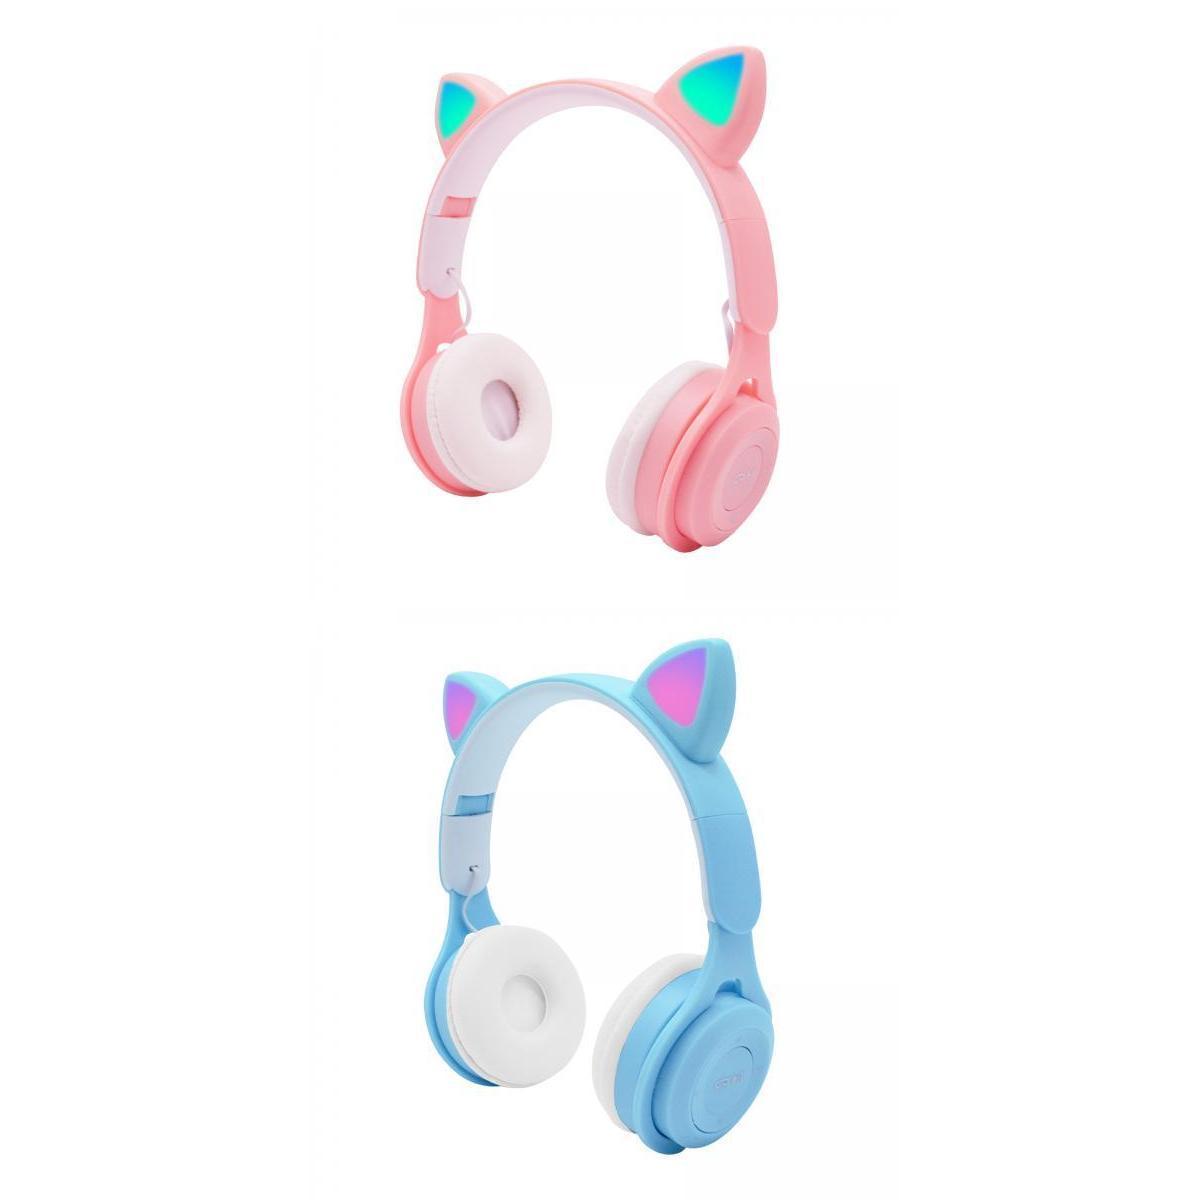 2 Sets  LED Light Up Wireless Foldable Headphones Over Ear with Mic